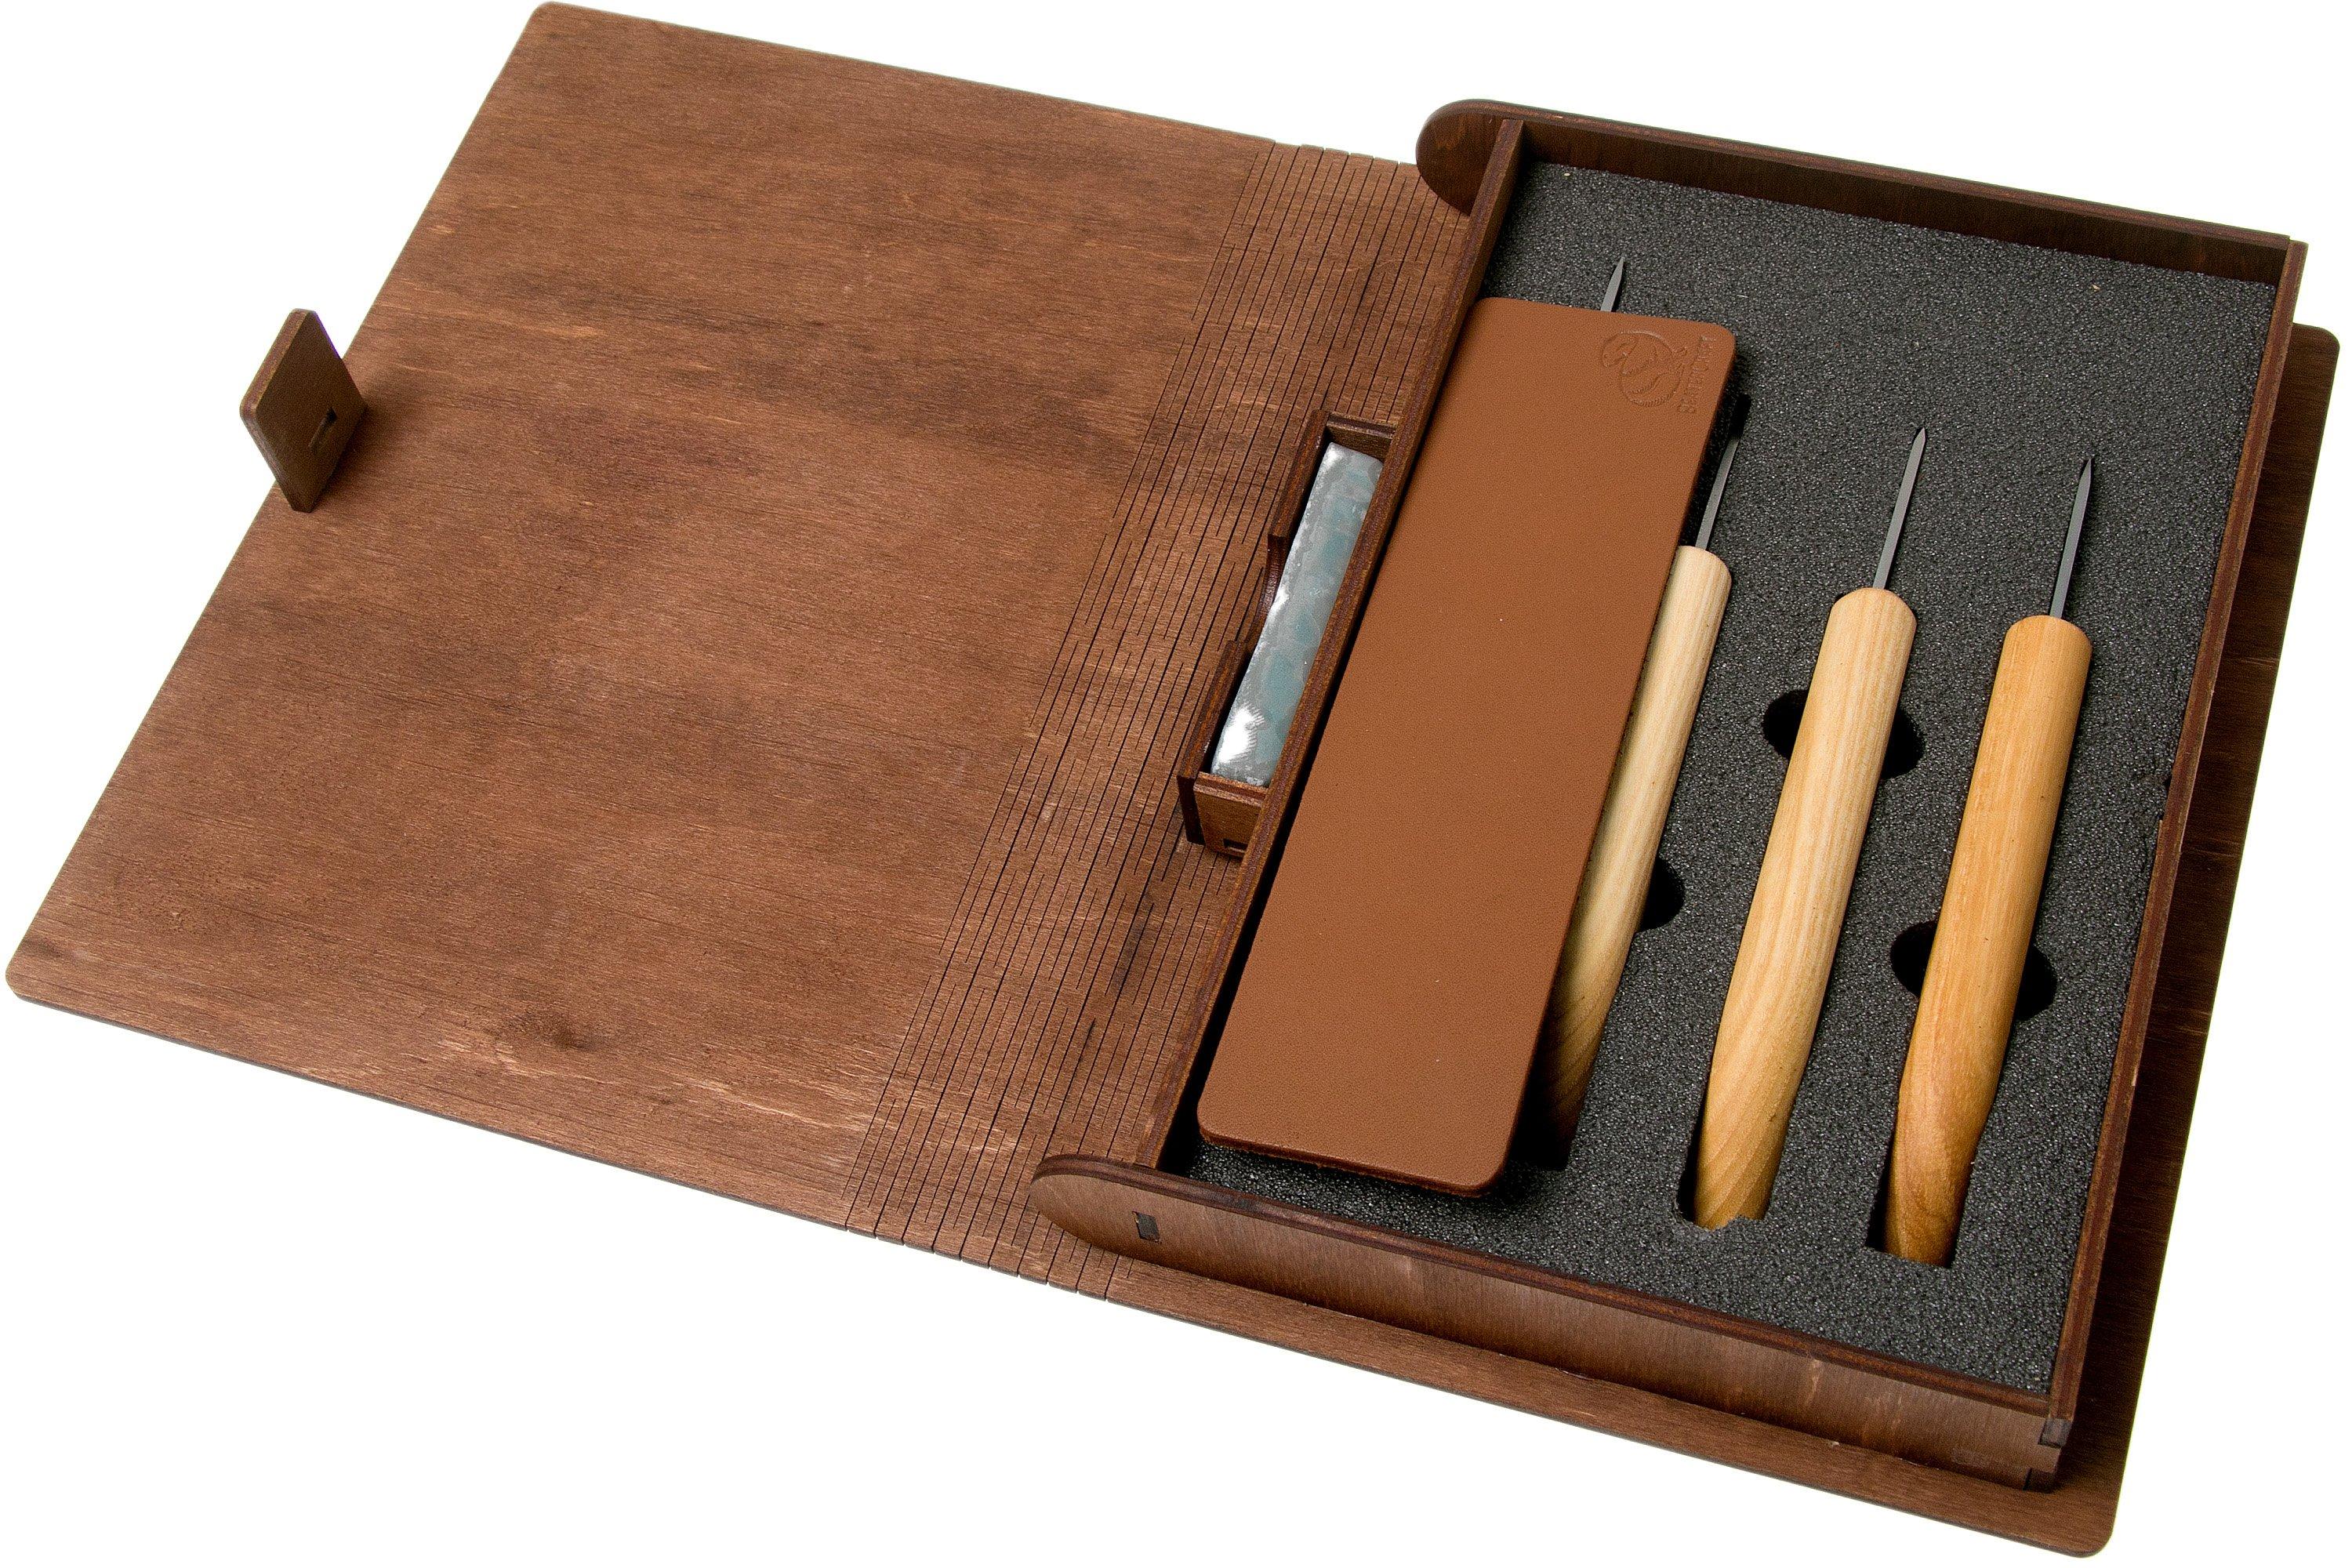 BeaverCraft Spoon Carving Set of 4 S19 Book, wood carving set with